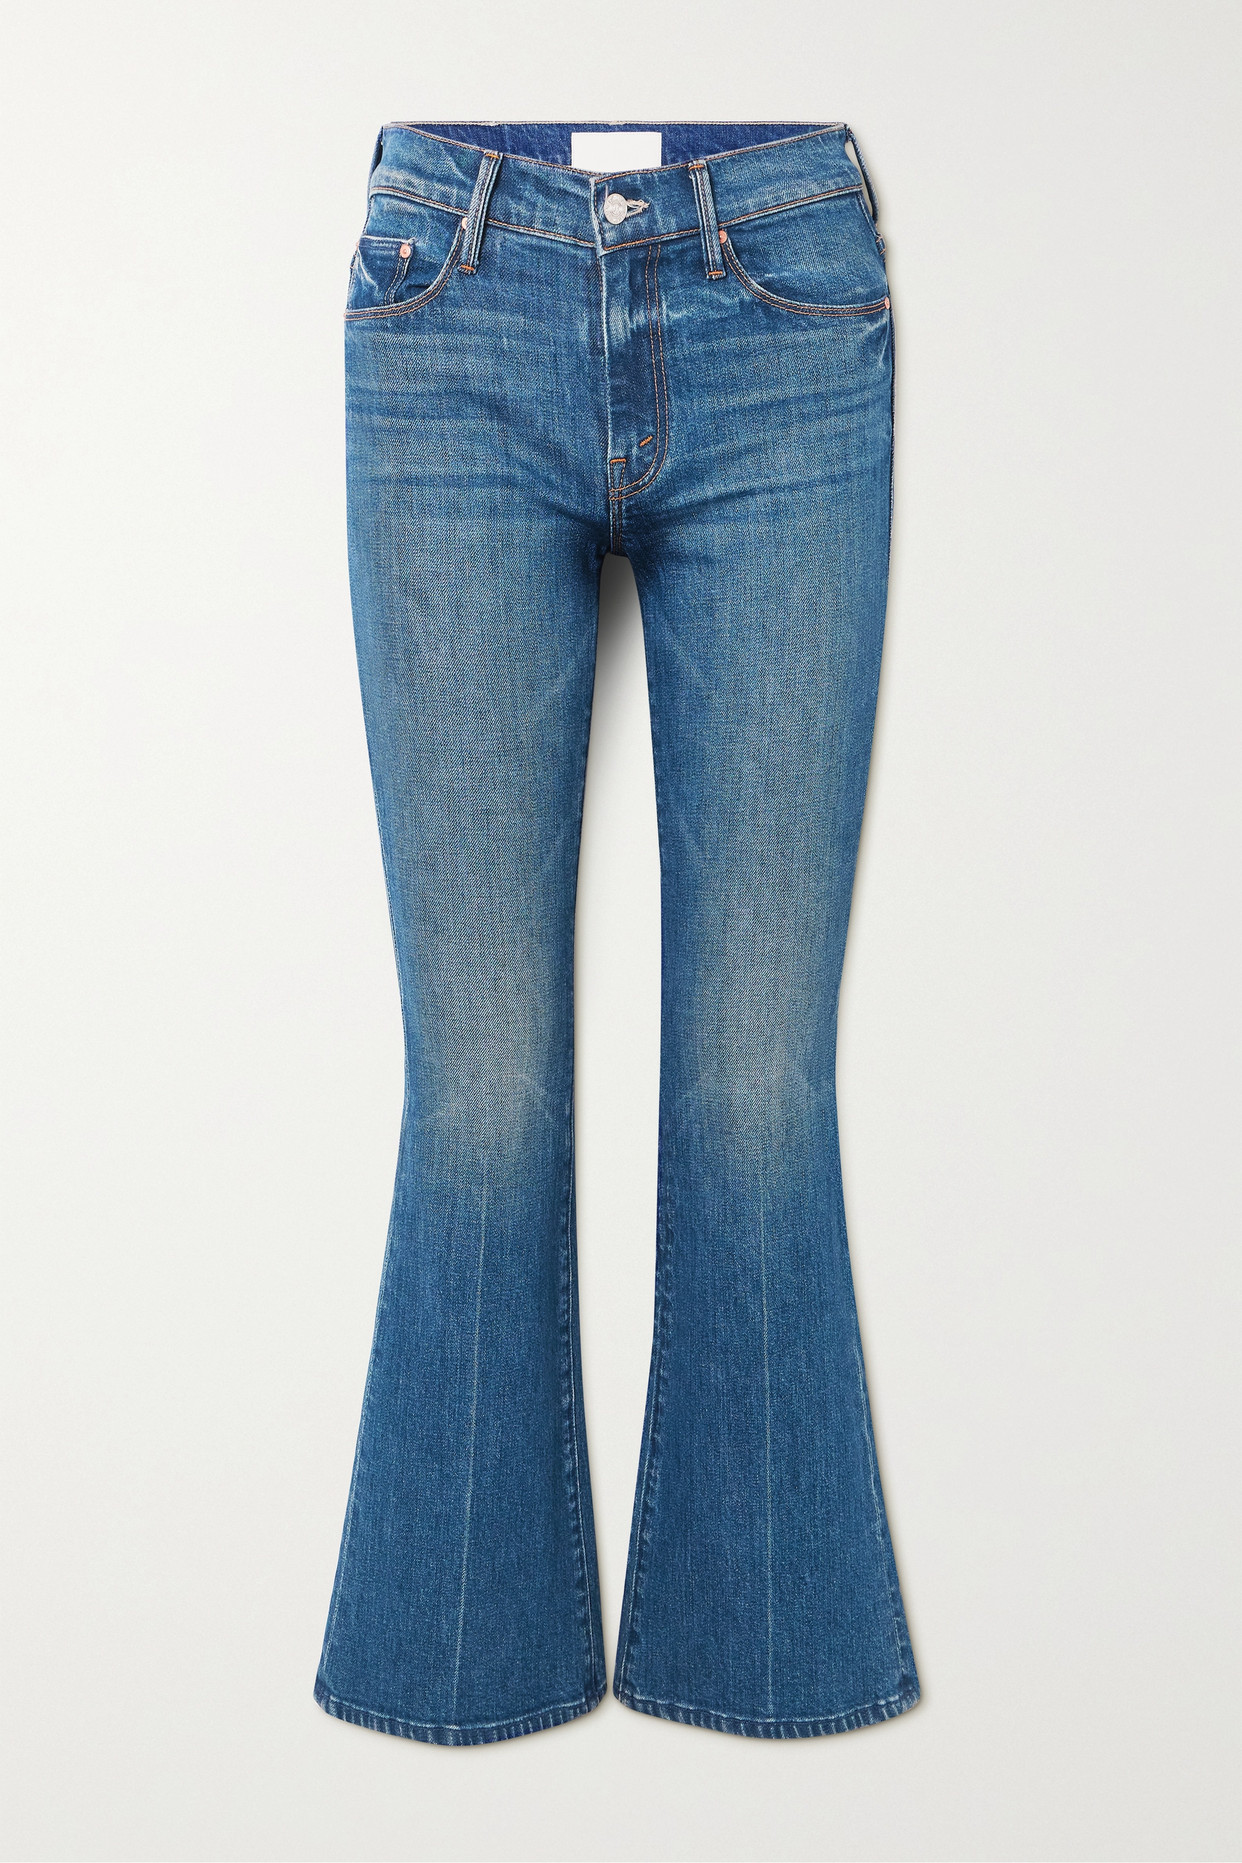 + Net Sustain the Weekender High-Rise Flared Jeans